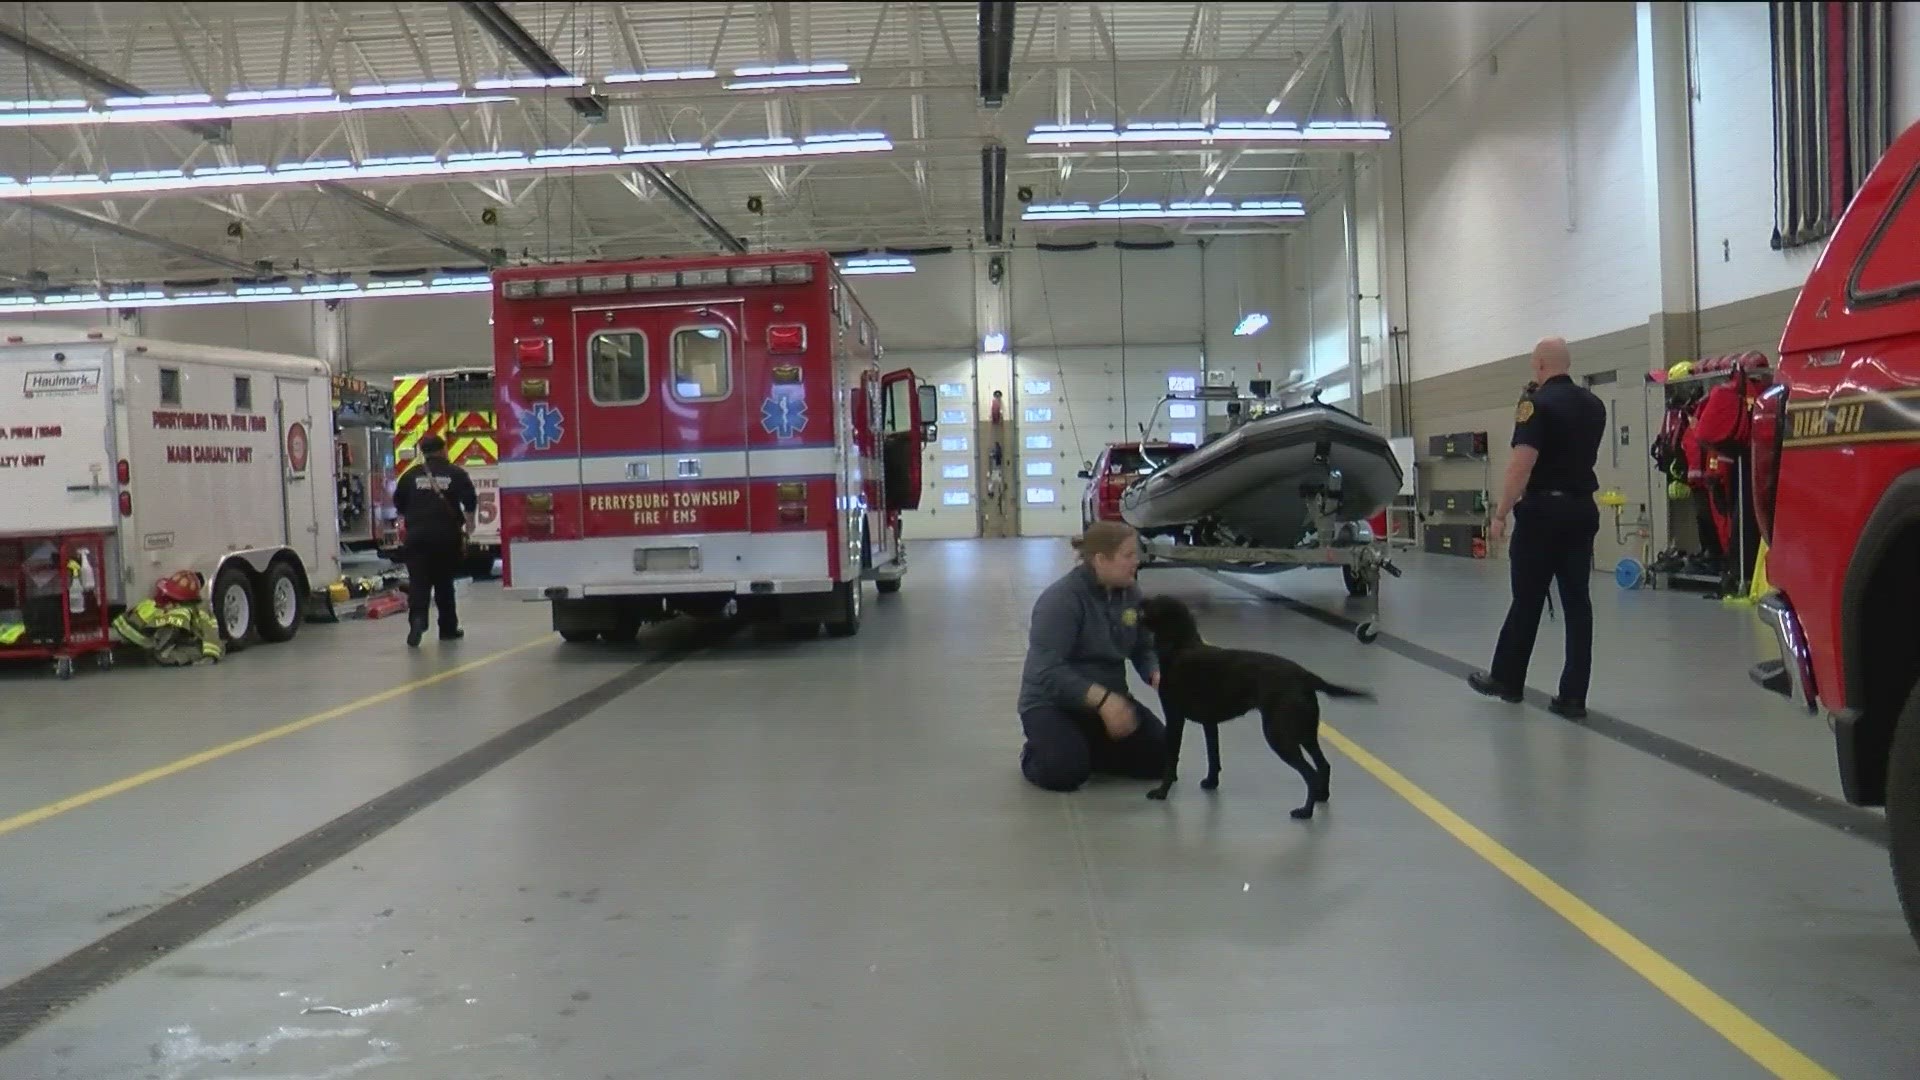 Dora may be one of the most important tools at Fire Station 74. She's a black lab who joined the crew about four years ago and plays a huge role every single day.